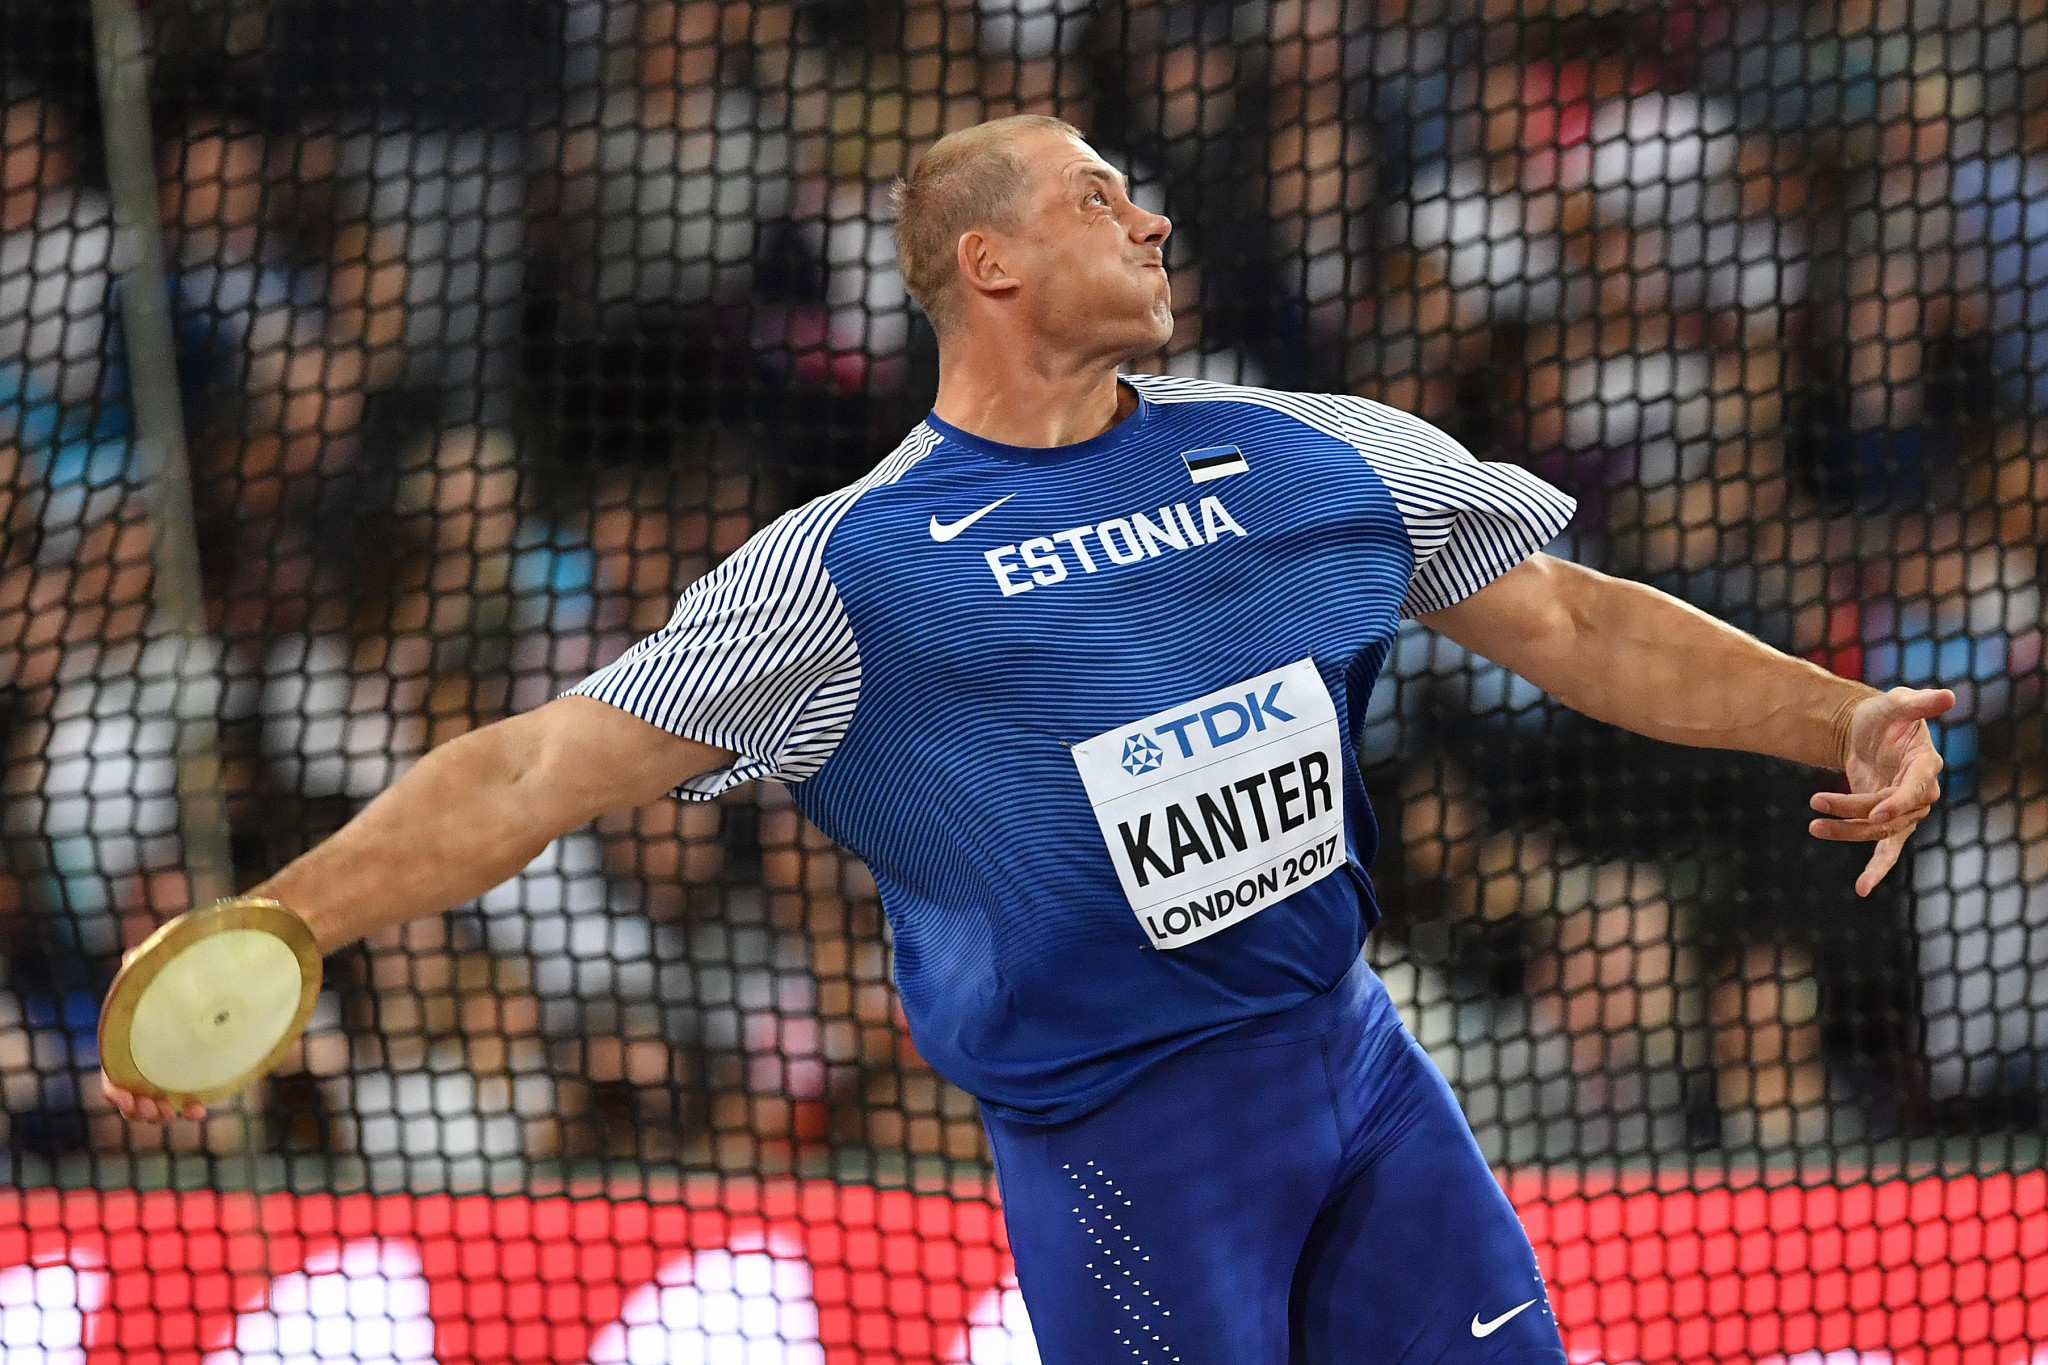 Gerd Kanter was one Estonian athlete to receive a special medal ©Getty Images